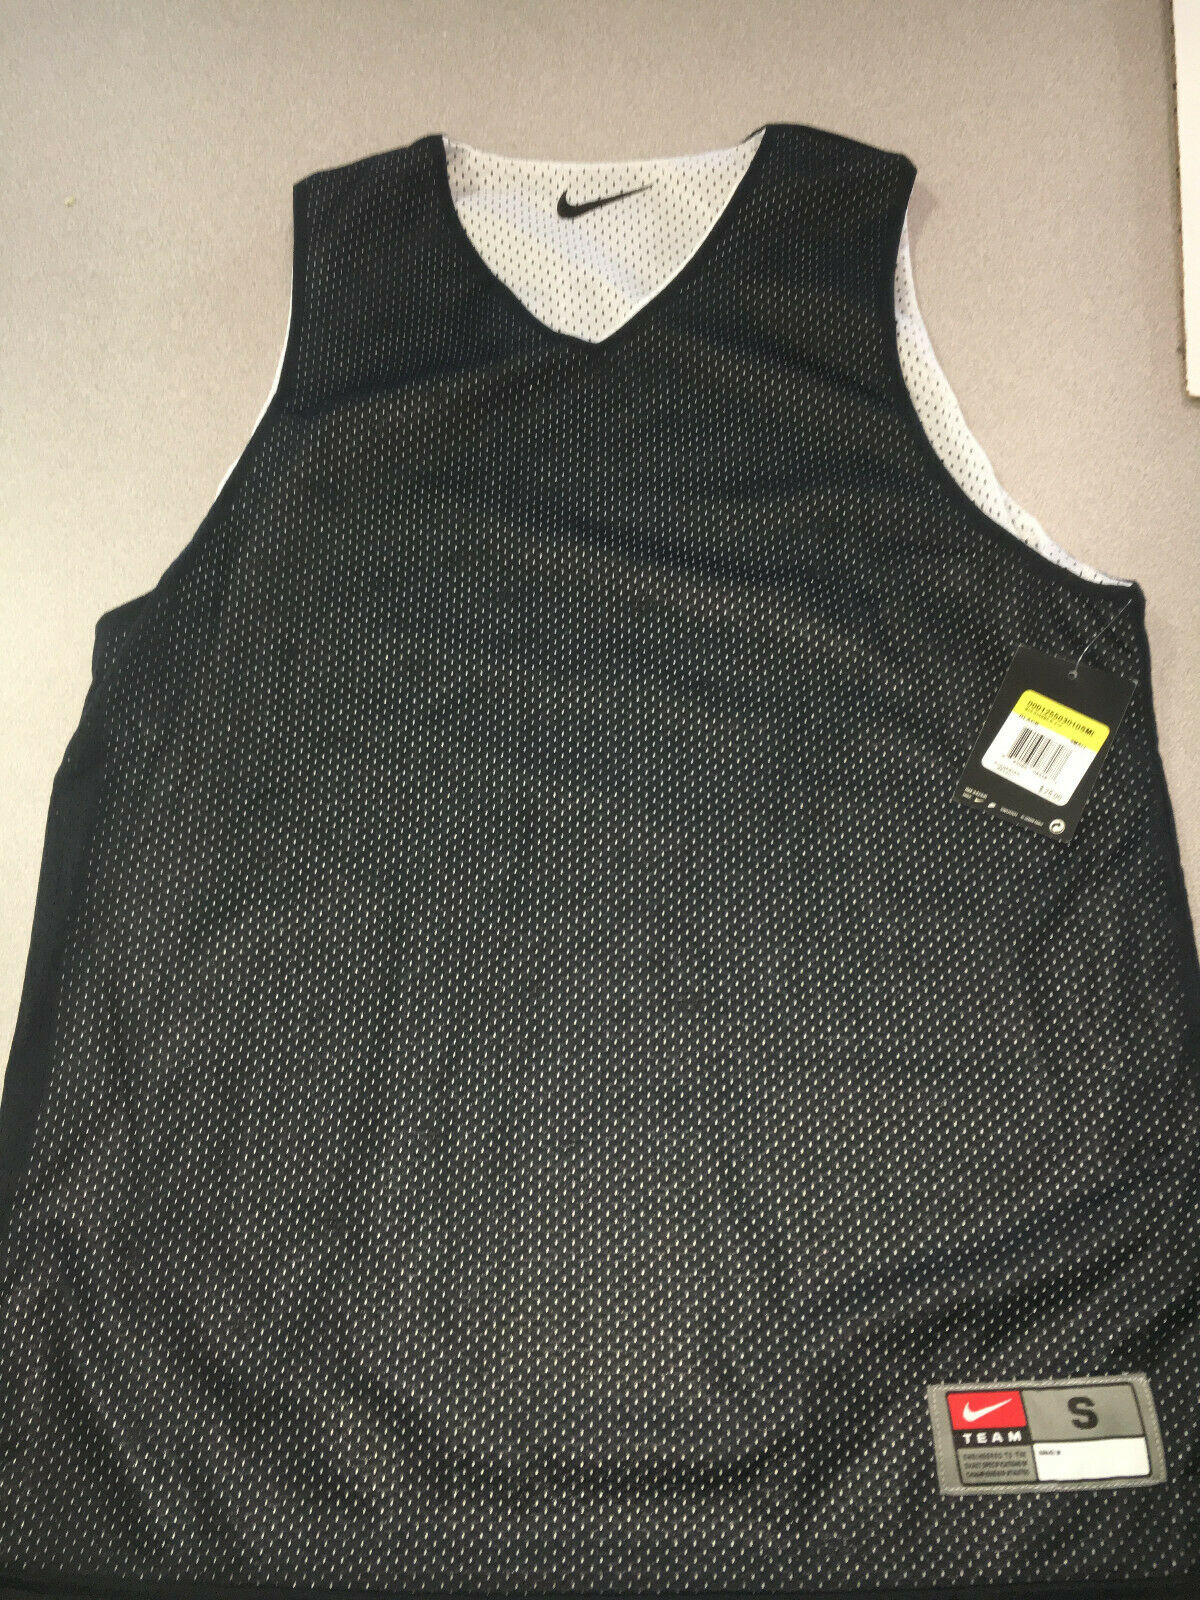 Nike Reversible Basketball Jersey- 60 % Off (lot Of 22 Adult Small)